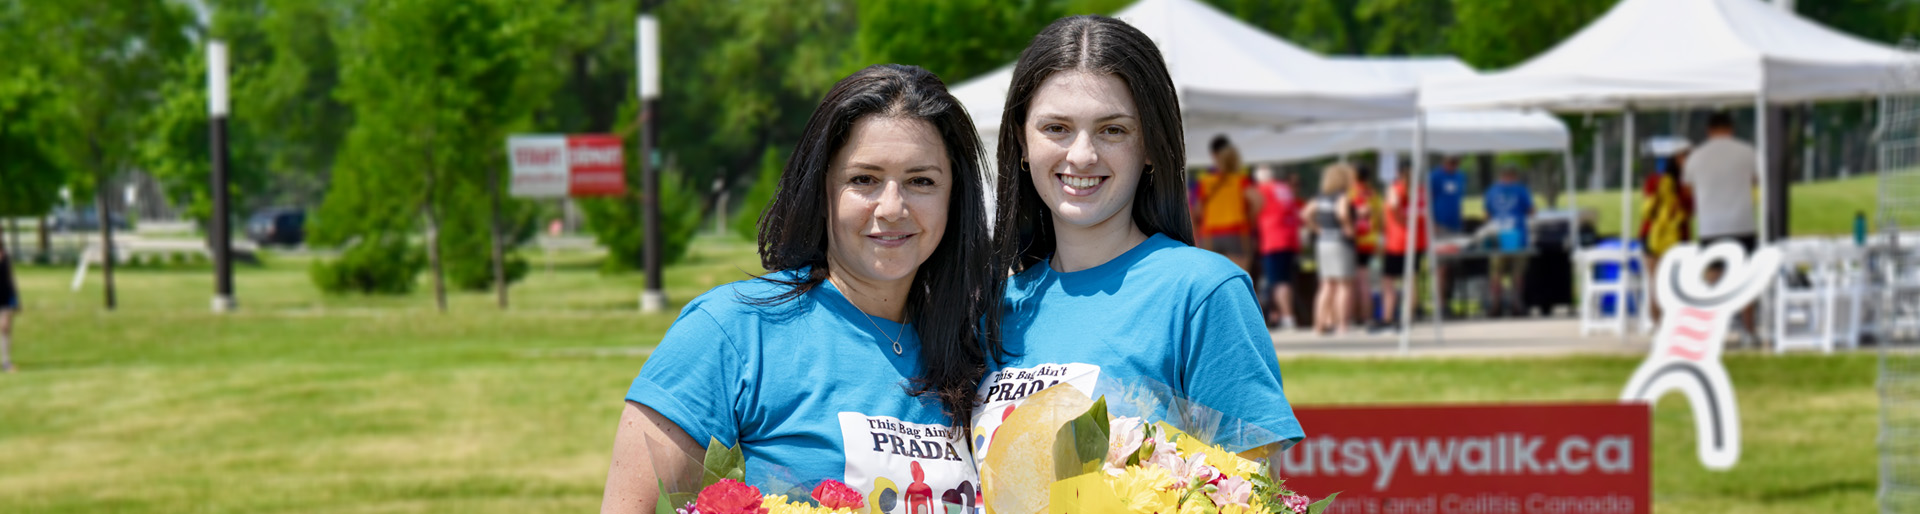 This bag ain't prada mother and daughter at Gutsy Walk